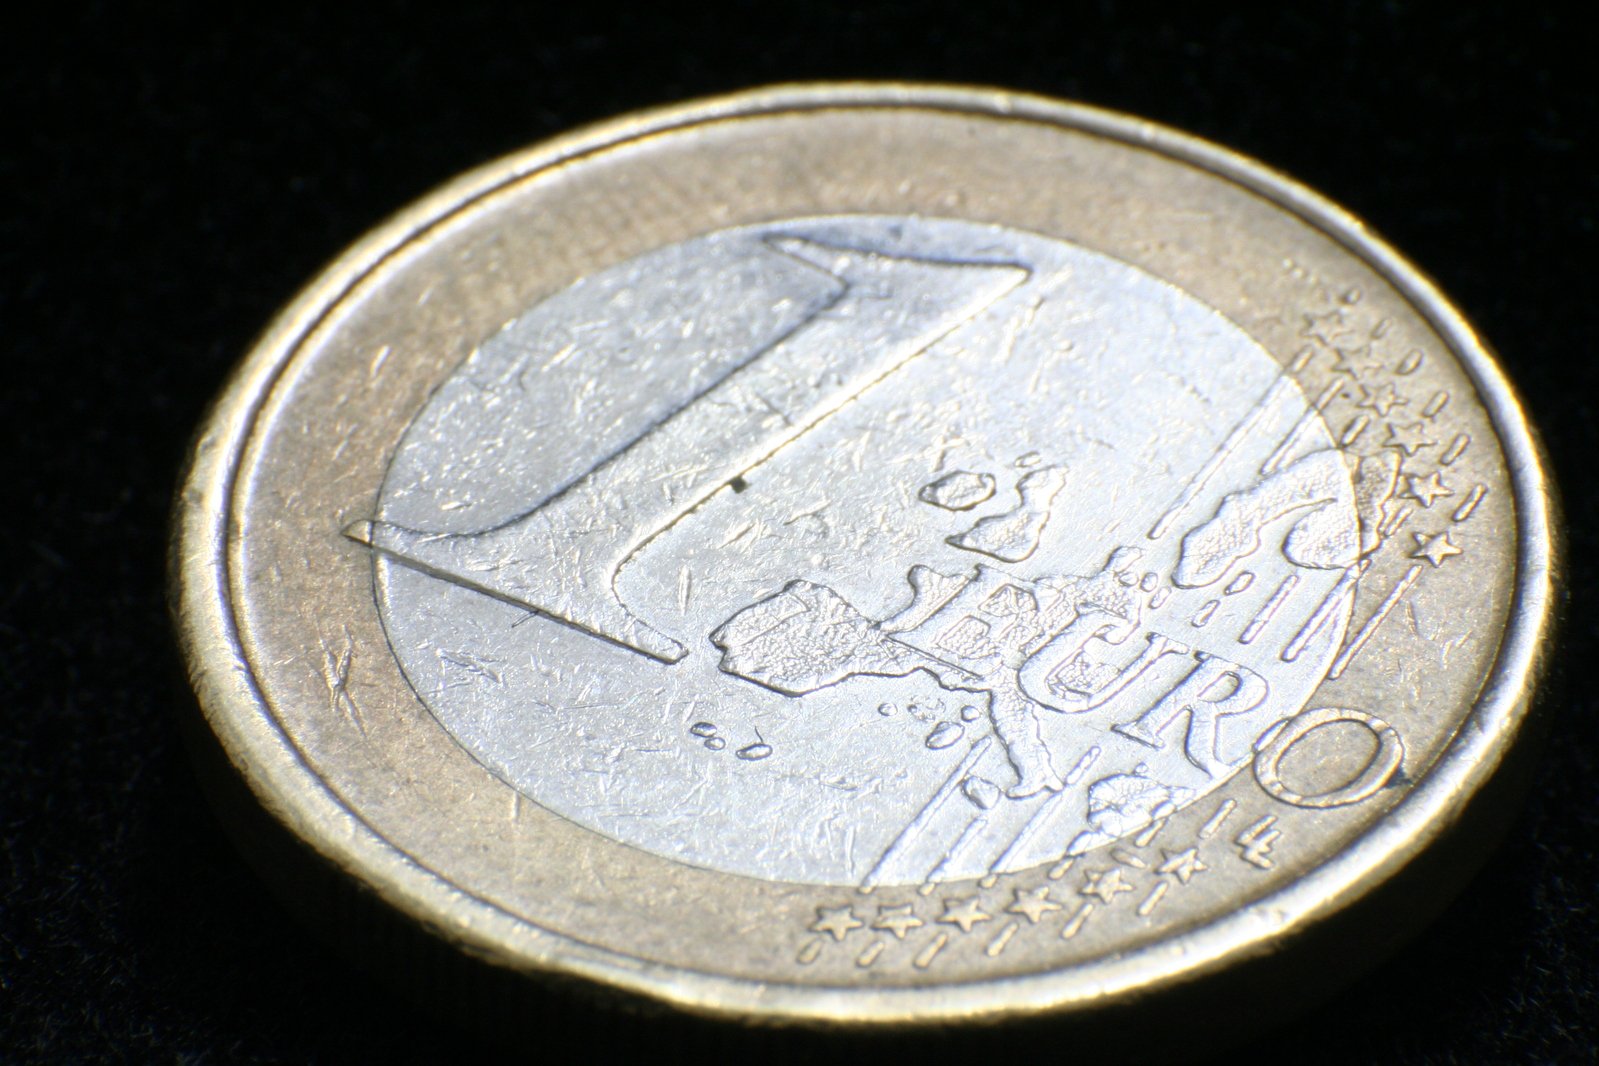 a one - euro coin is shown with a black background